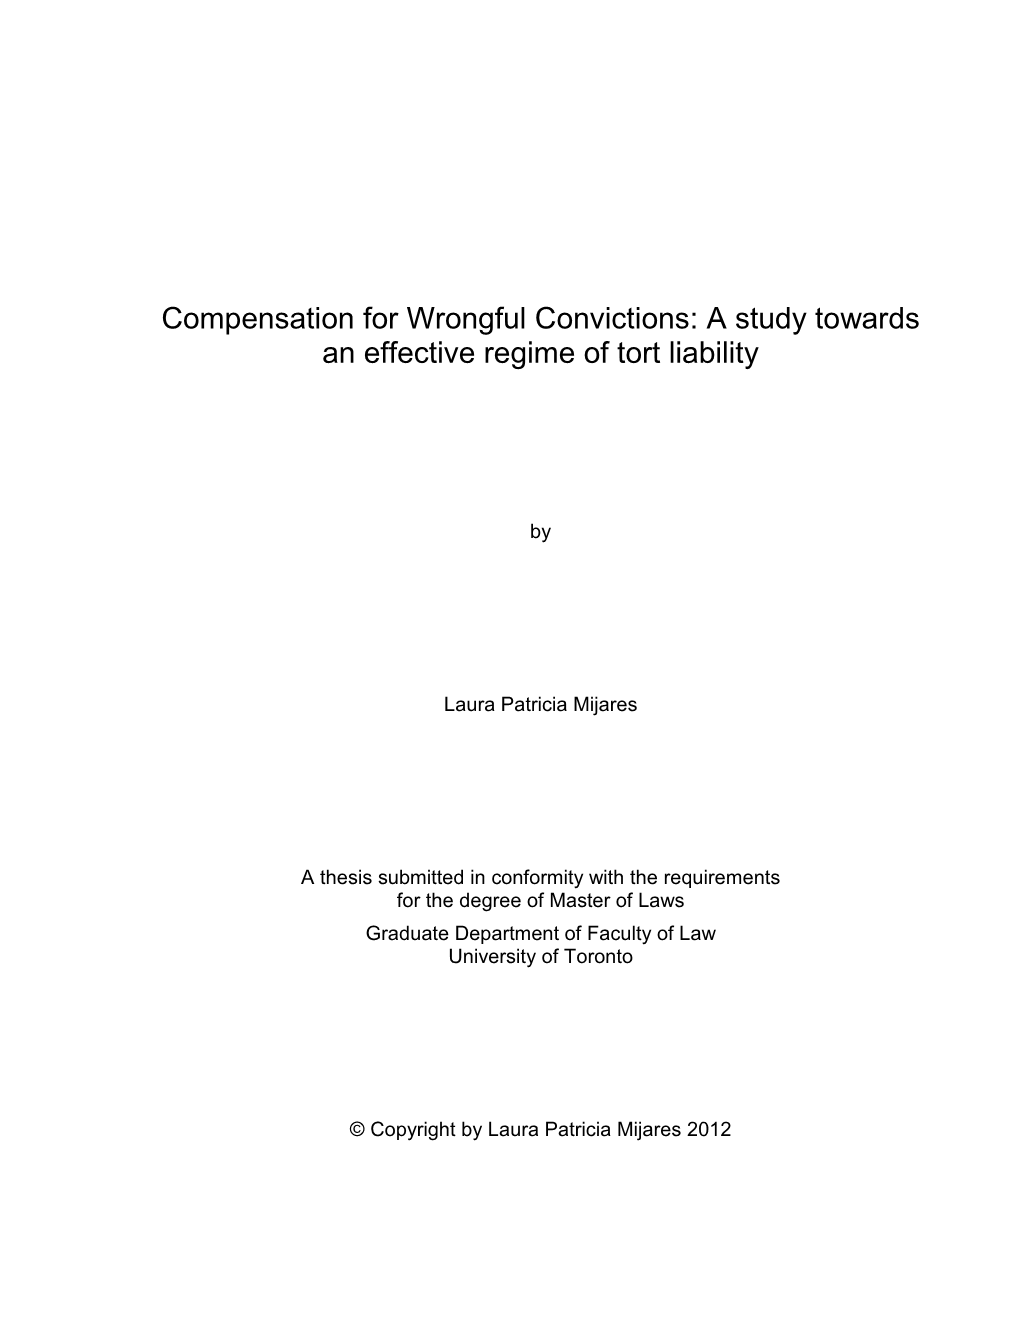 Compensation for Wrongful Convictions: a Study Towards an Effective Regime of Tort Liability